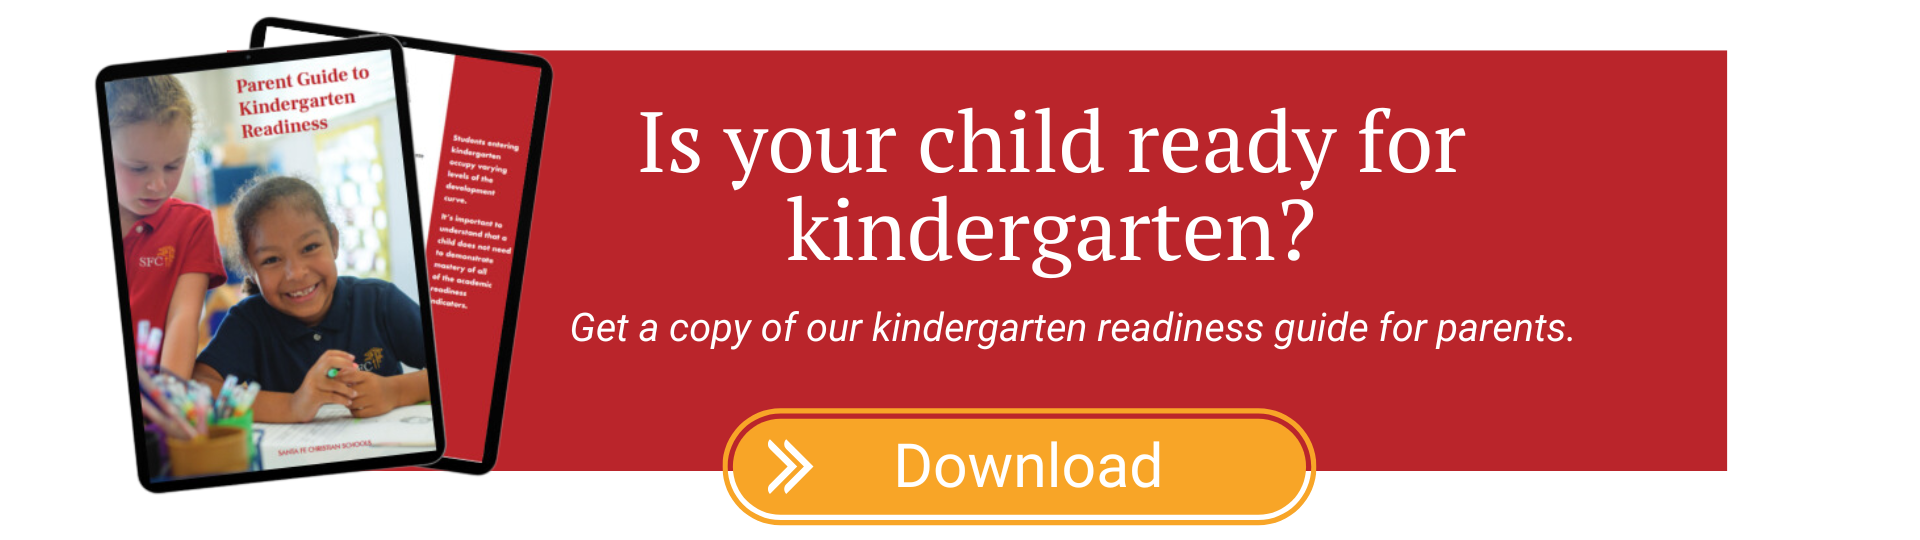 Is your Child Ready for Kindergarten?